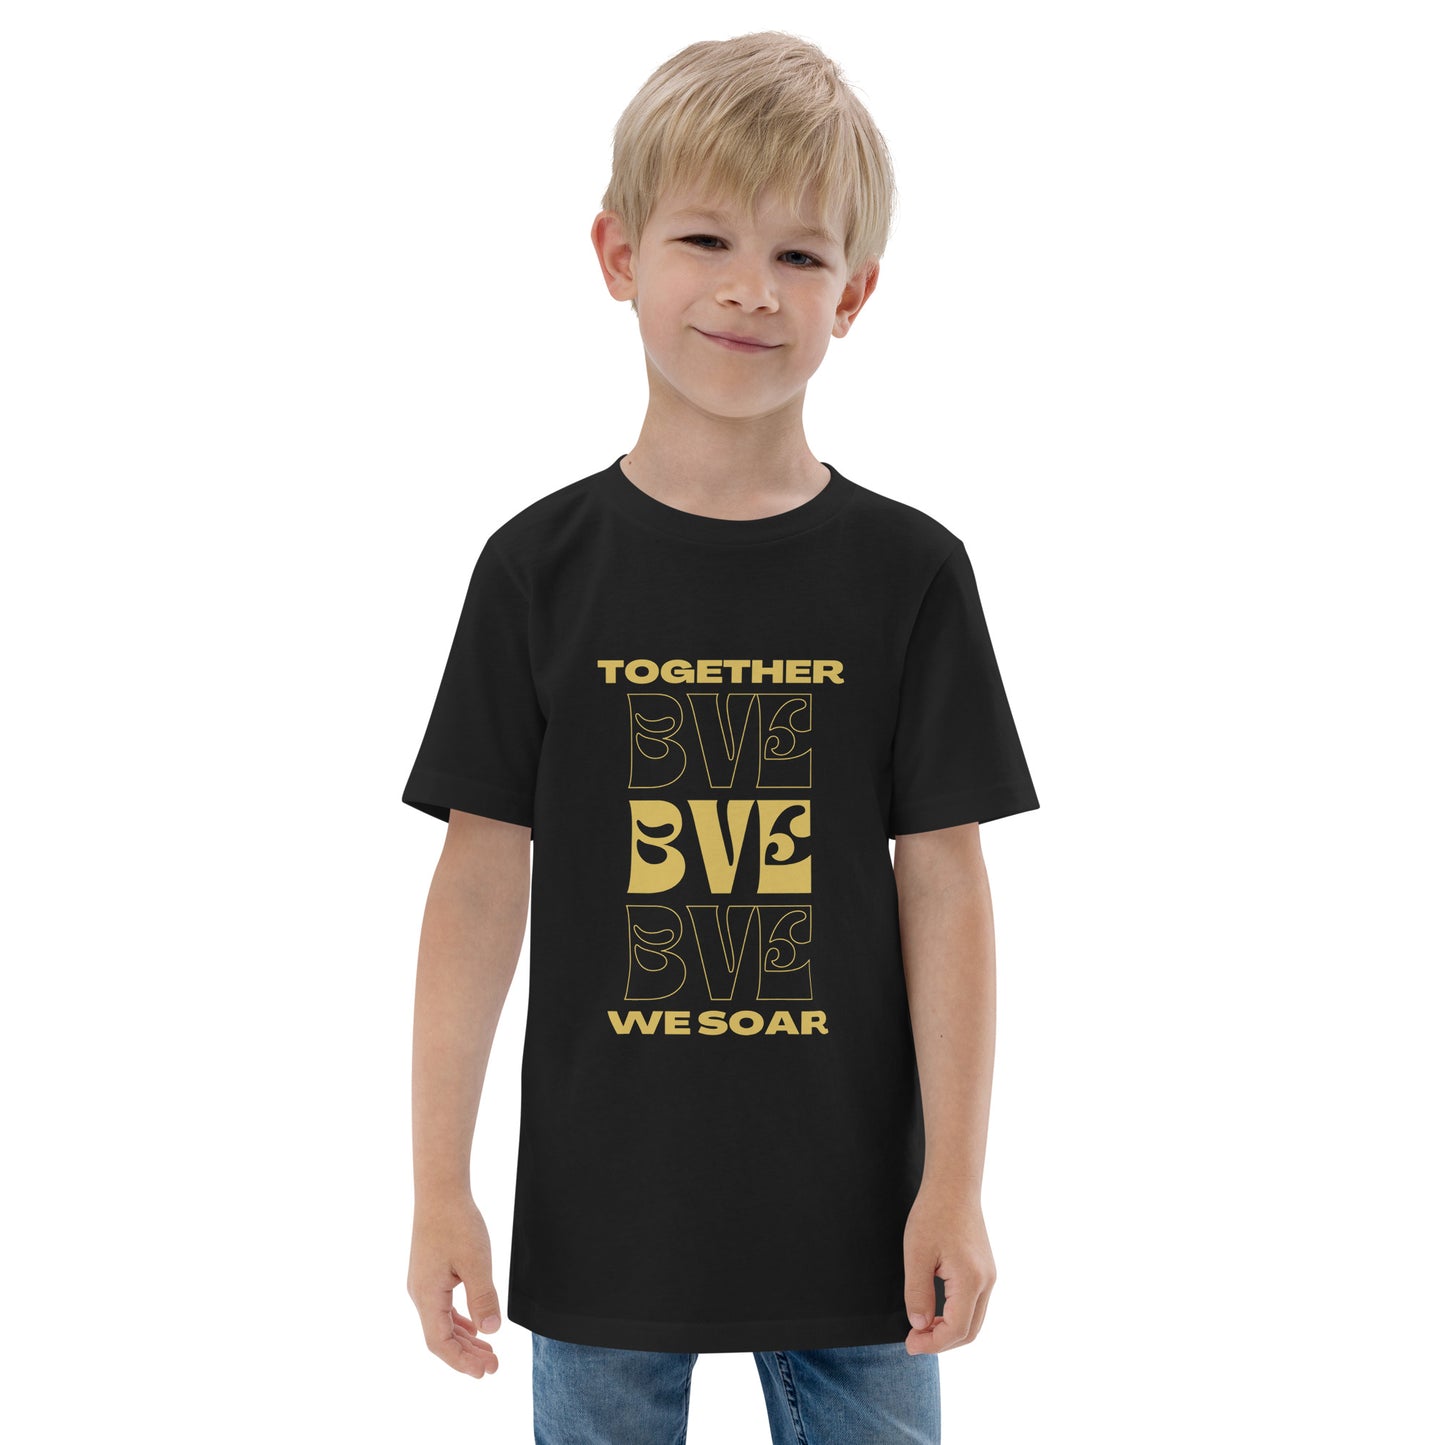 Together We Soar BVE Youth jersey t-shirt